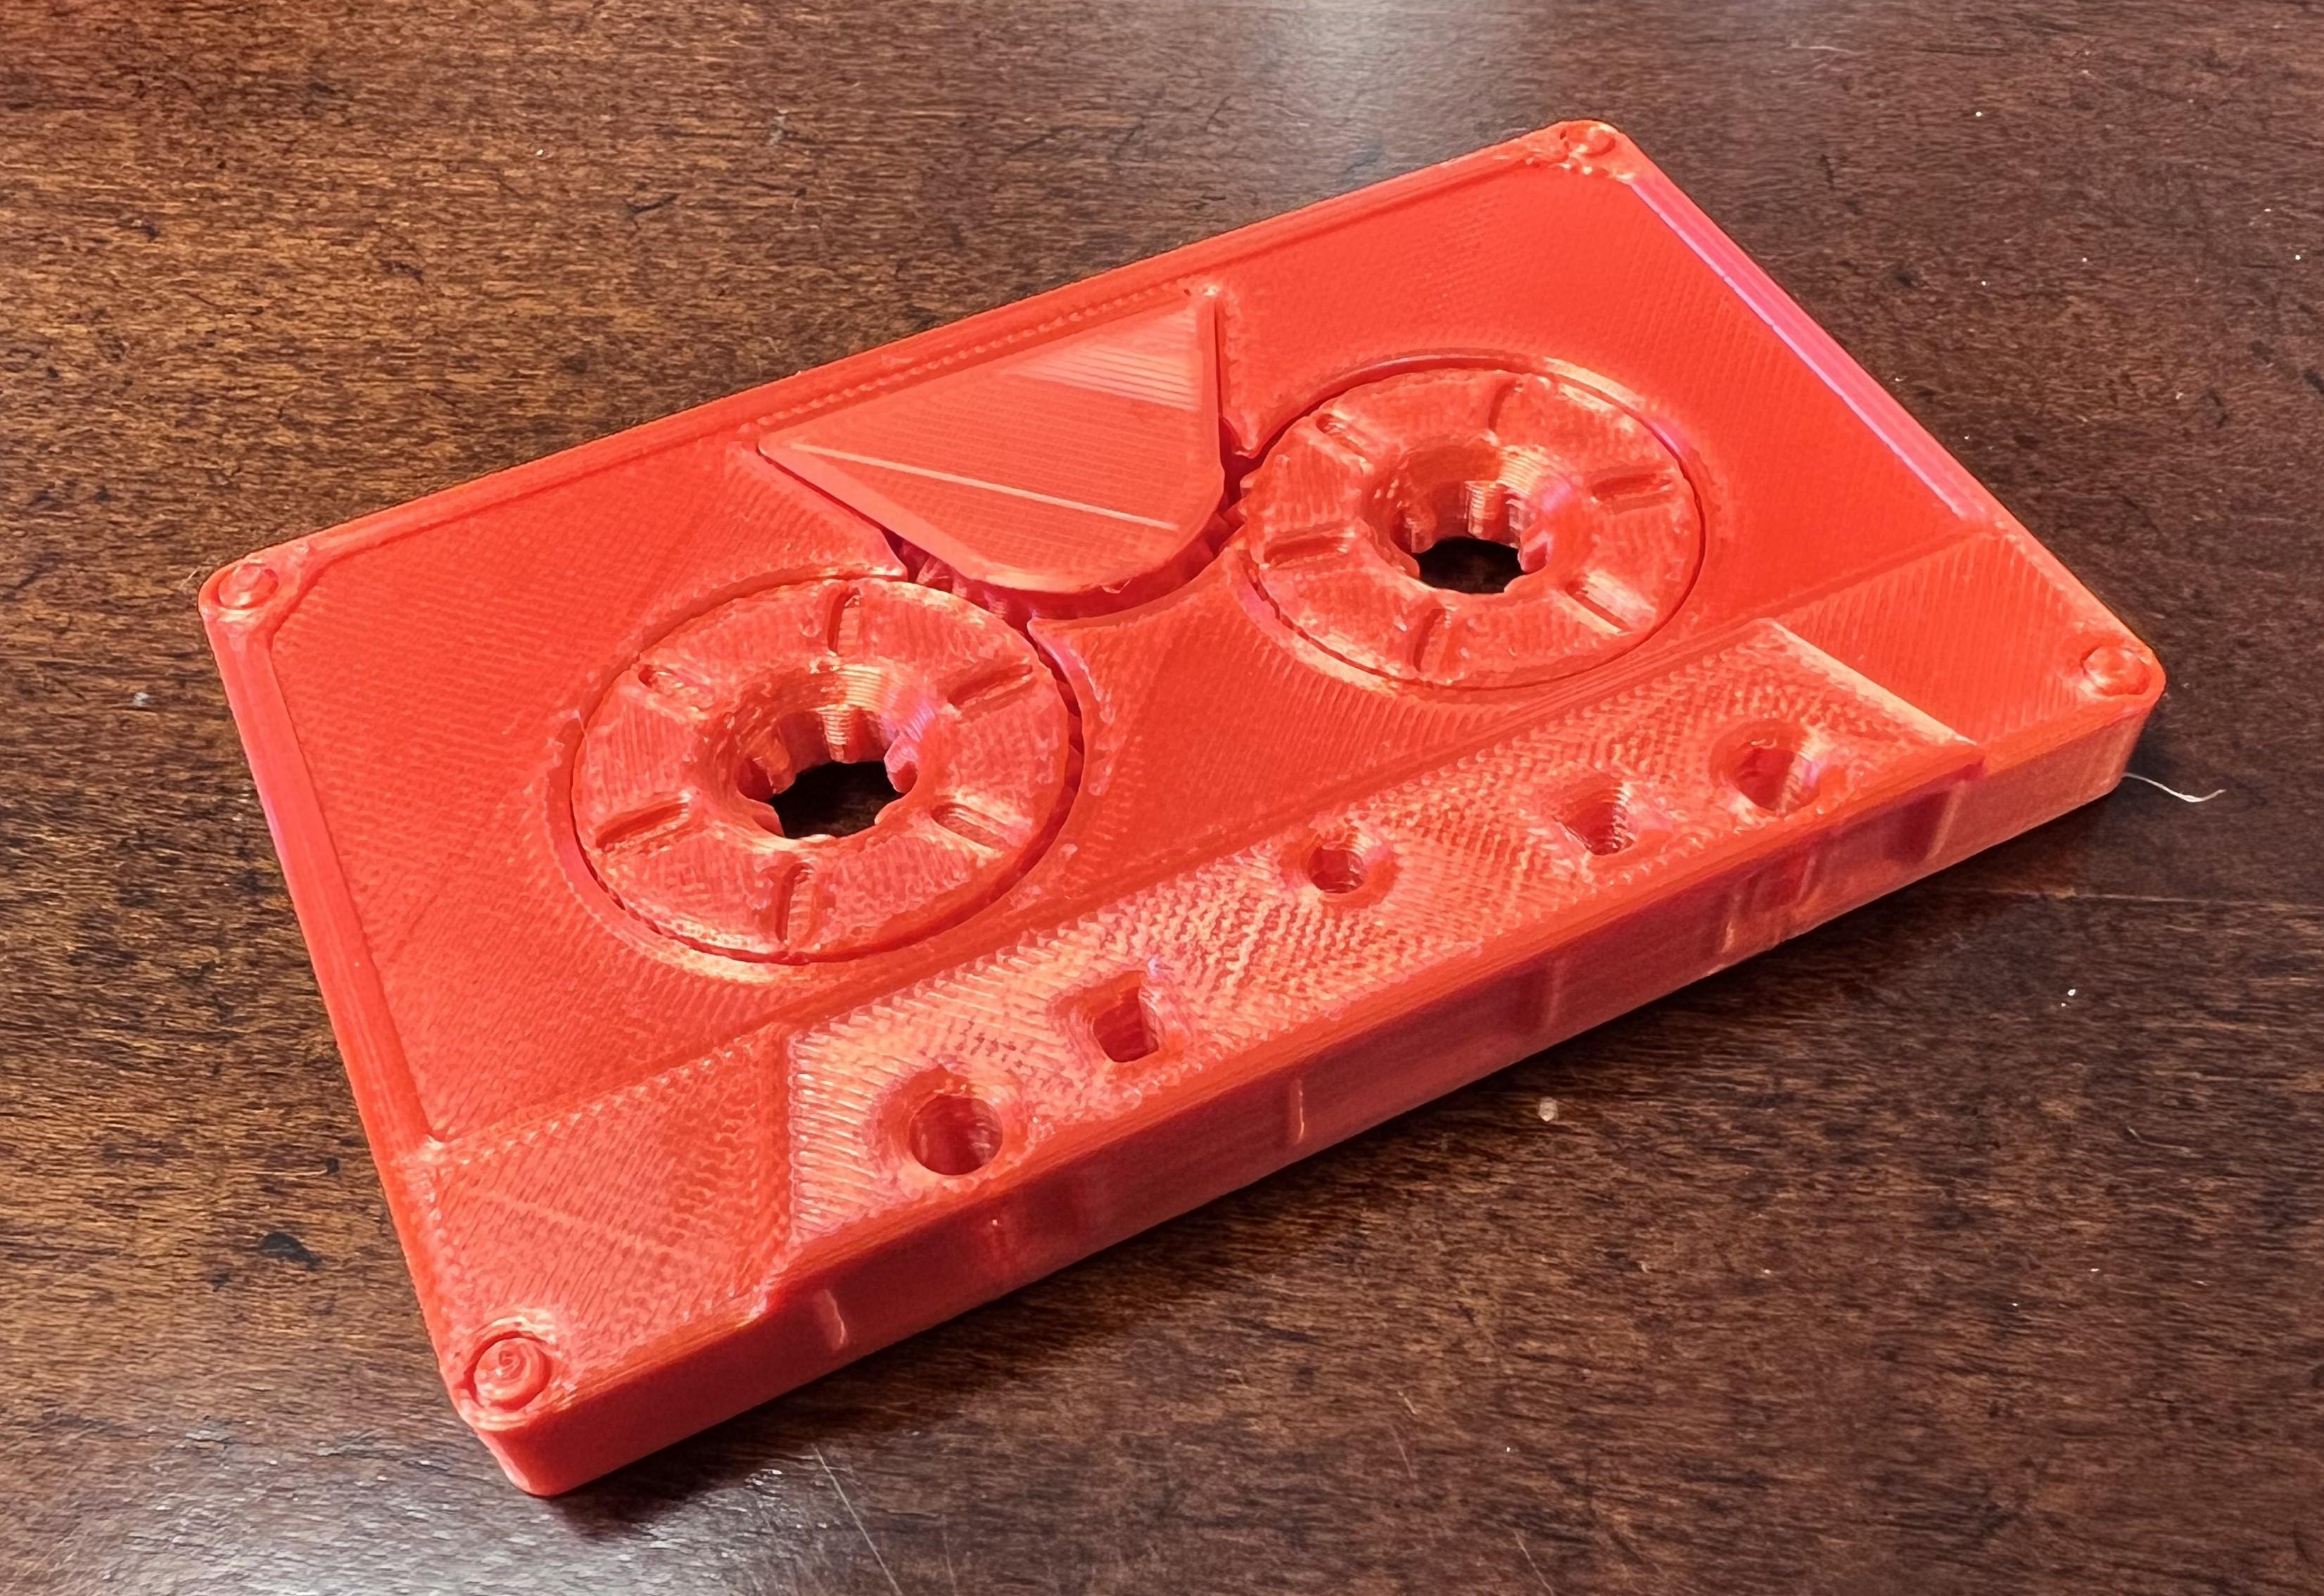 Cassette Tape - Fidget / Print in Place - Printed nicely! Inland Orange Silk. I glued the cover on, and put a little WD40 into the wheels which made it run very smoothly. - 3d model